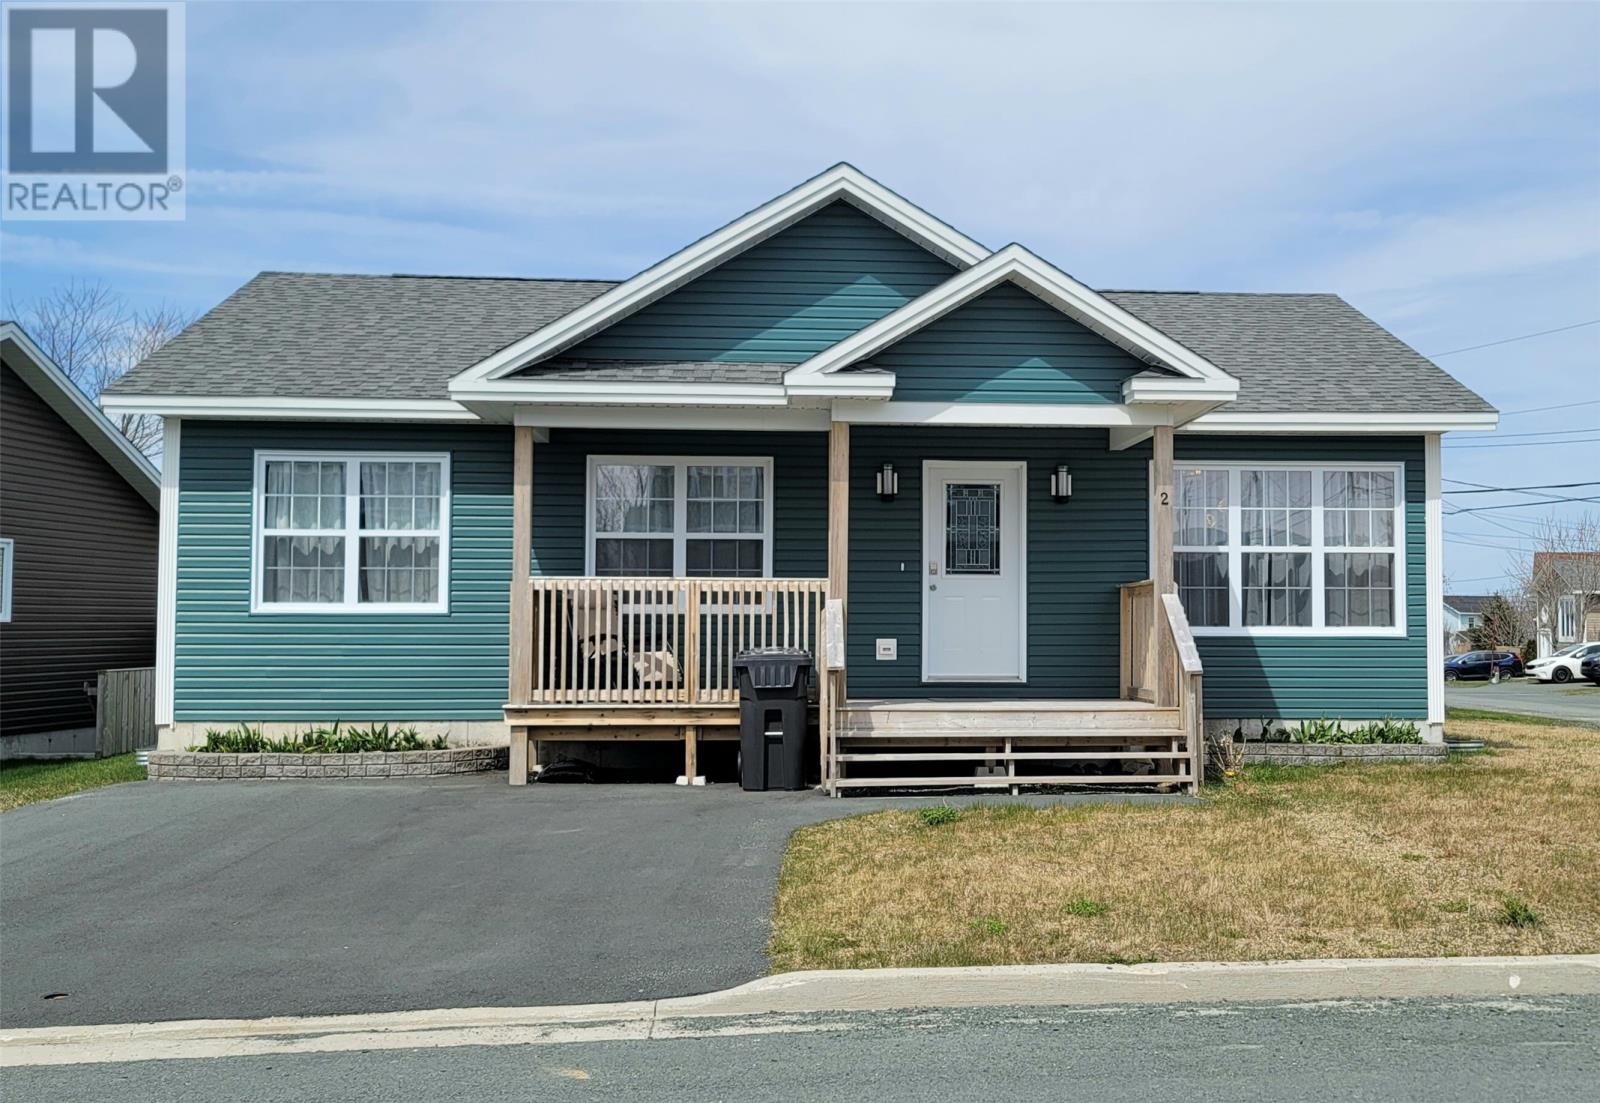 2 Gardner Drive located in Conception Bay South, Newfoundland and Labrador